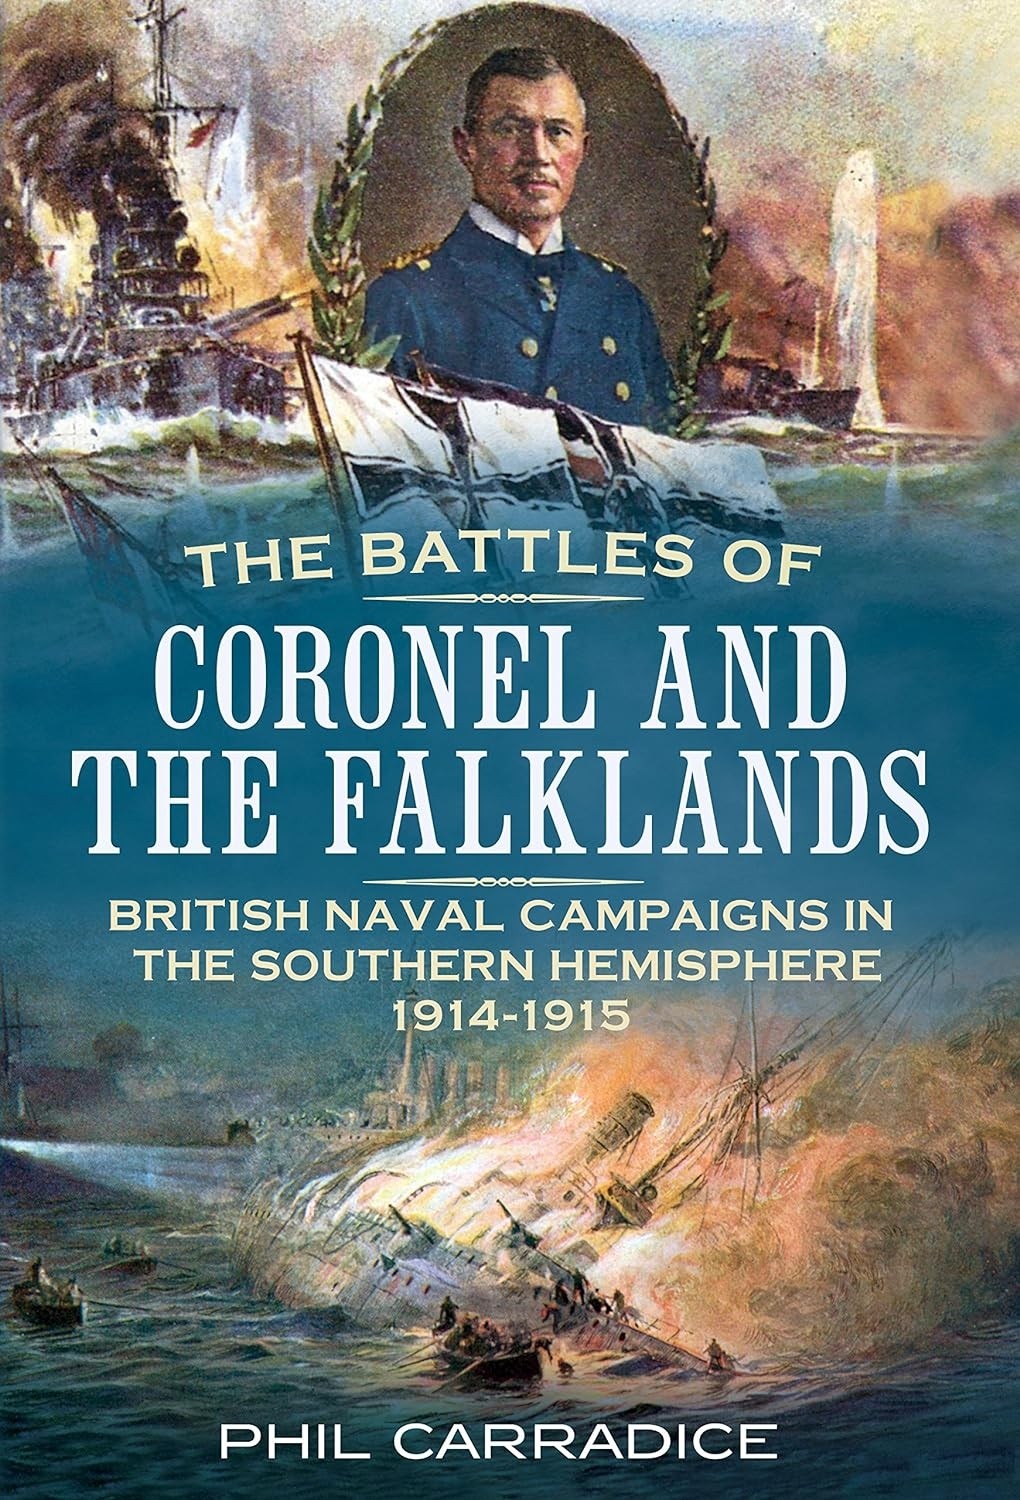 The Battles of Coronel and the Falklands: British Naval Campaigns in the Southern Hemisphere 1914-15